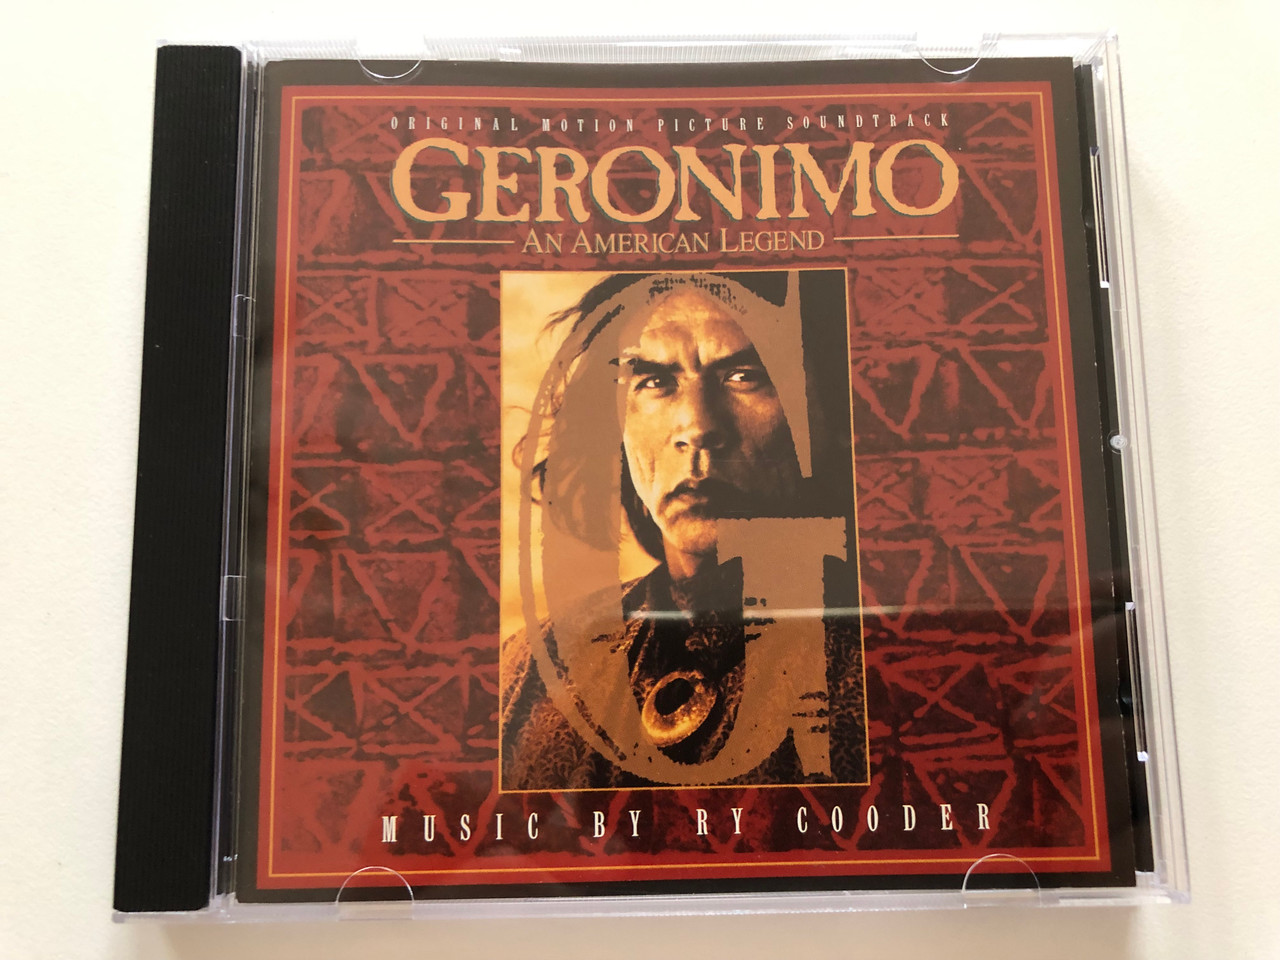 https://cdn10.bigcommerce.com/s-62bdpkt7pb/products/31177/images/183535/Geronimo_Original_Motion_Picture_Soundtrack_-_An_American_Legend_Music_by_Ry_Cooder_Columbia_Audio_CD_1993_475645_2_1__50508.1625598536.1280.1280.JPG?c=2